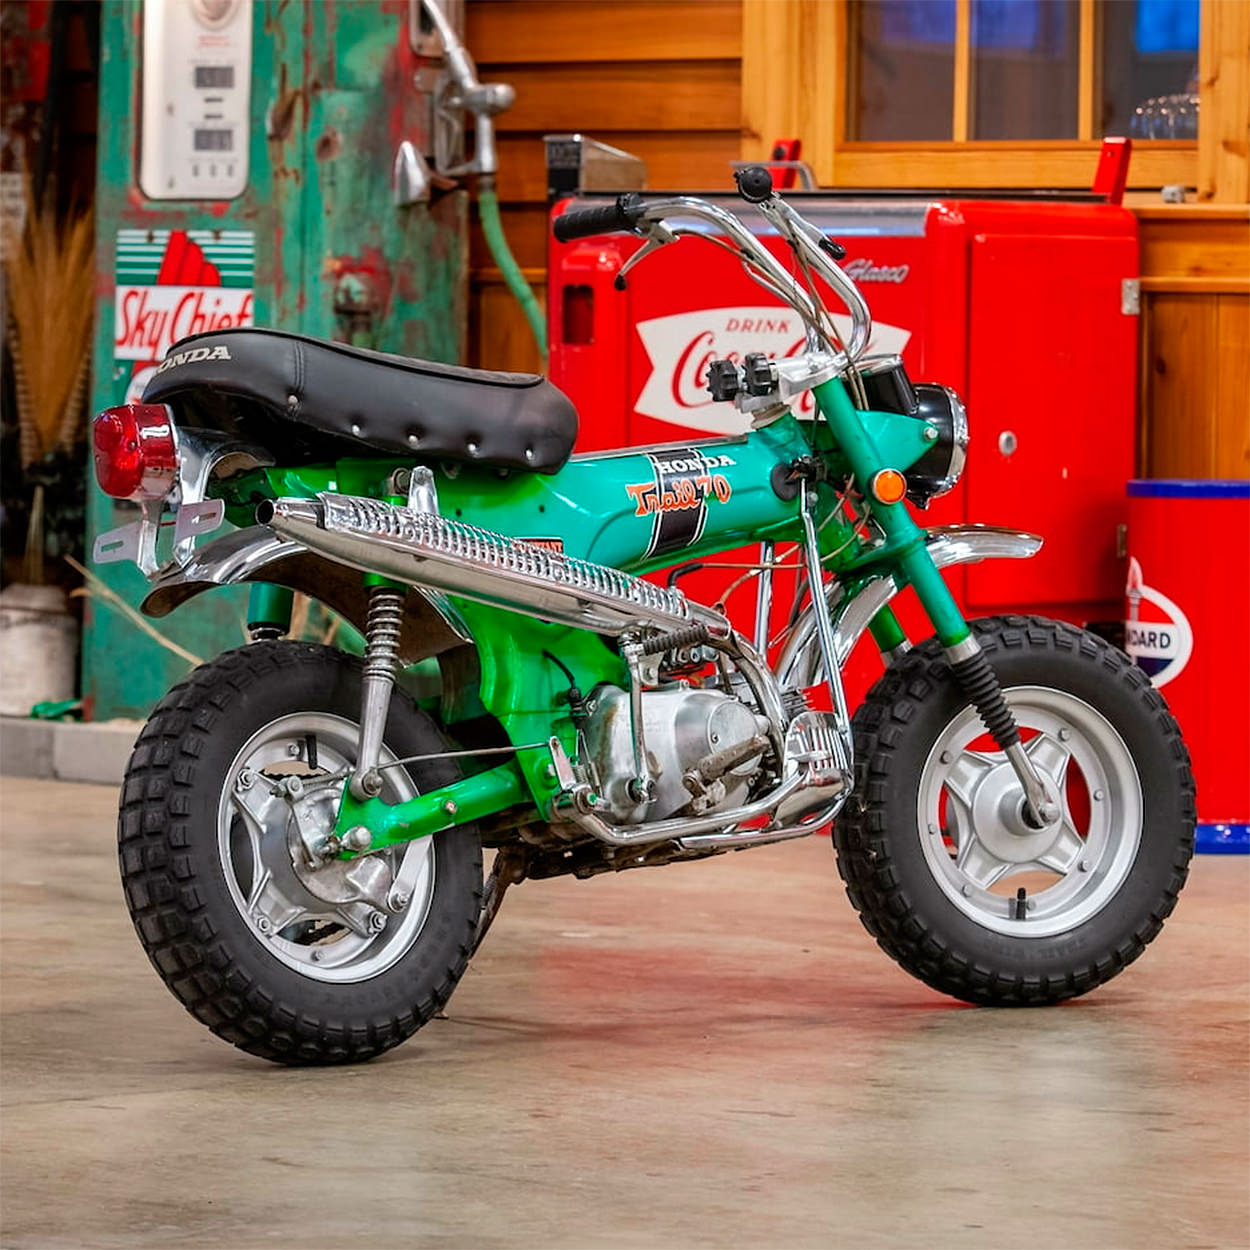 1970 Honda CT70H from the Iowa Collection